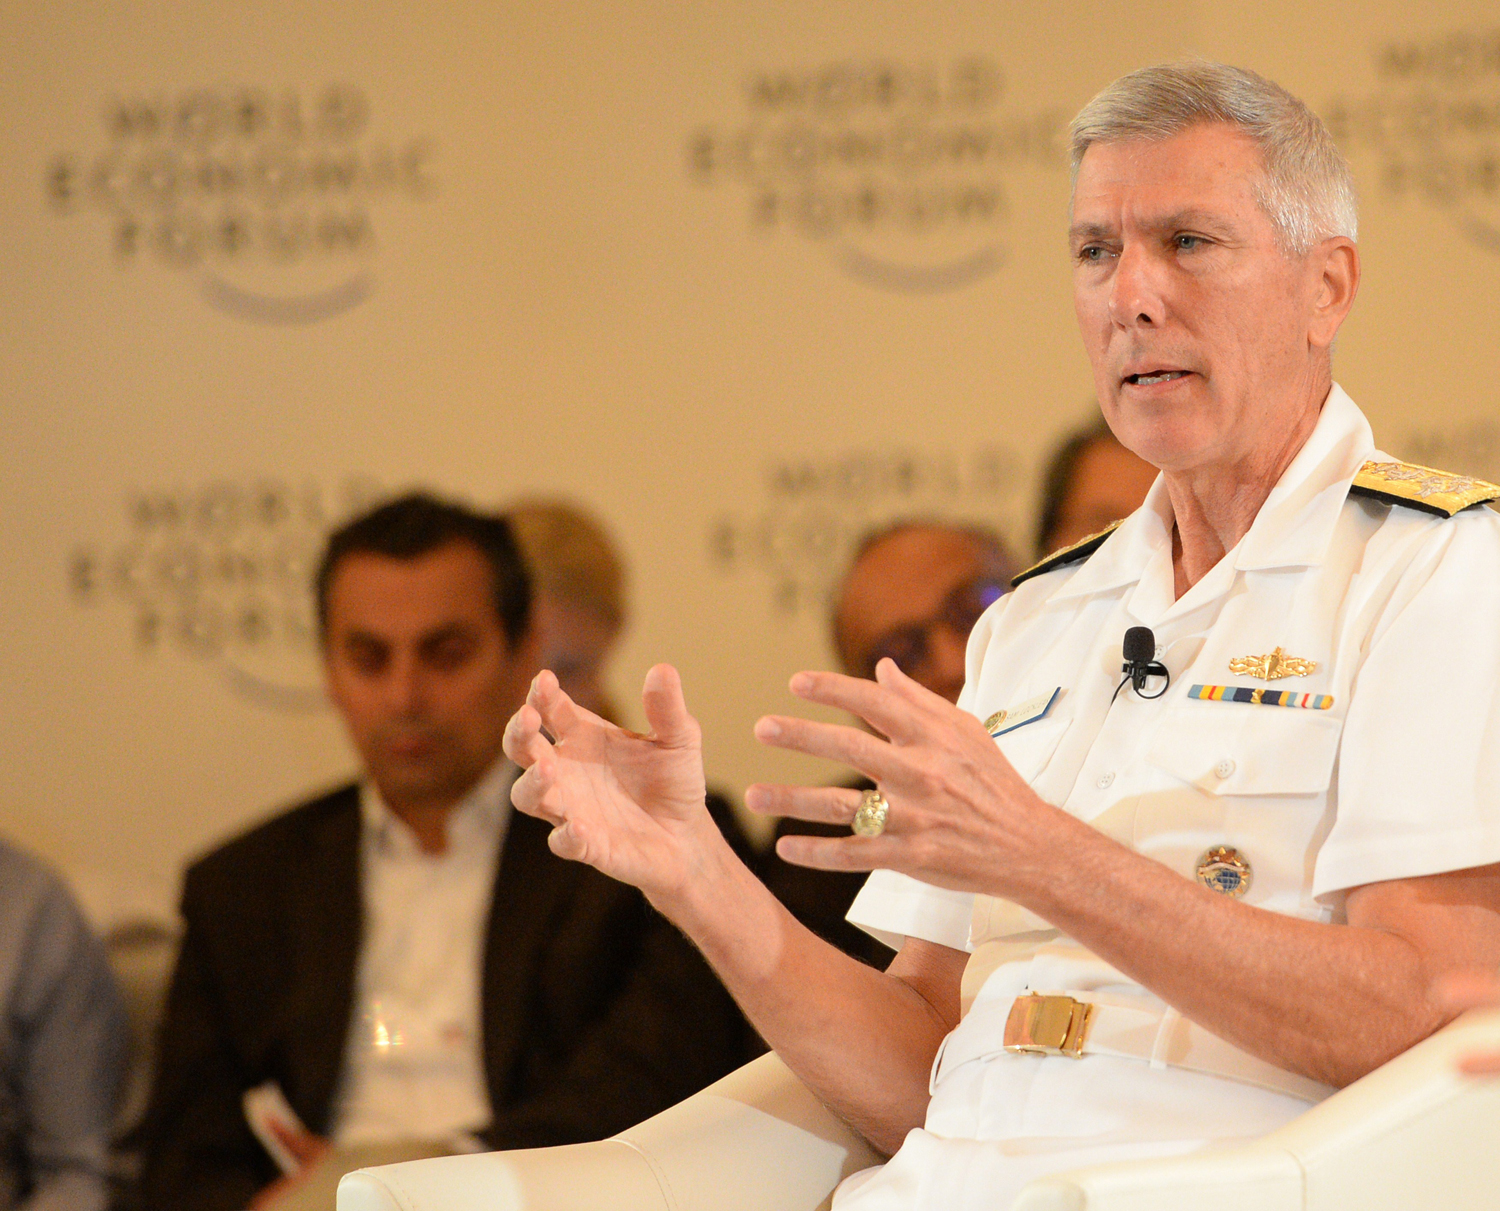 Admiral Samuel Locklear, U.S. Pacific Fleet Command commander, speaks during a session of the World Economic Forum on East Asia in Manila on May 23, 2014 (Ted Aljibe —AFP/Getty Images)